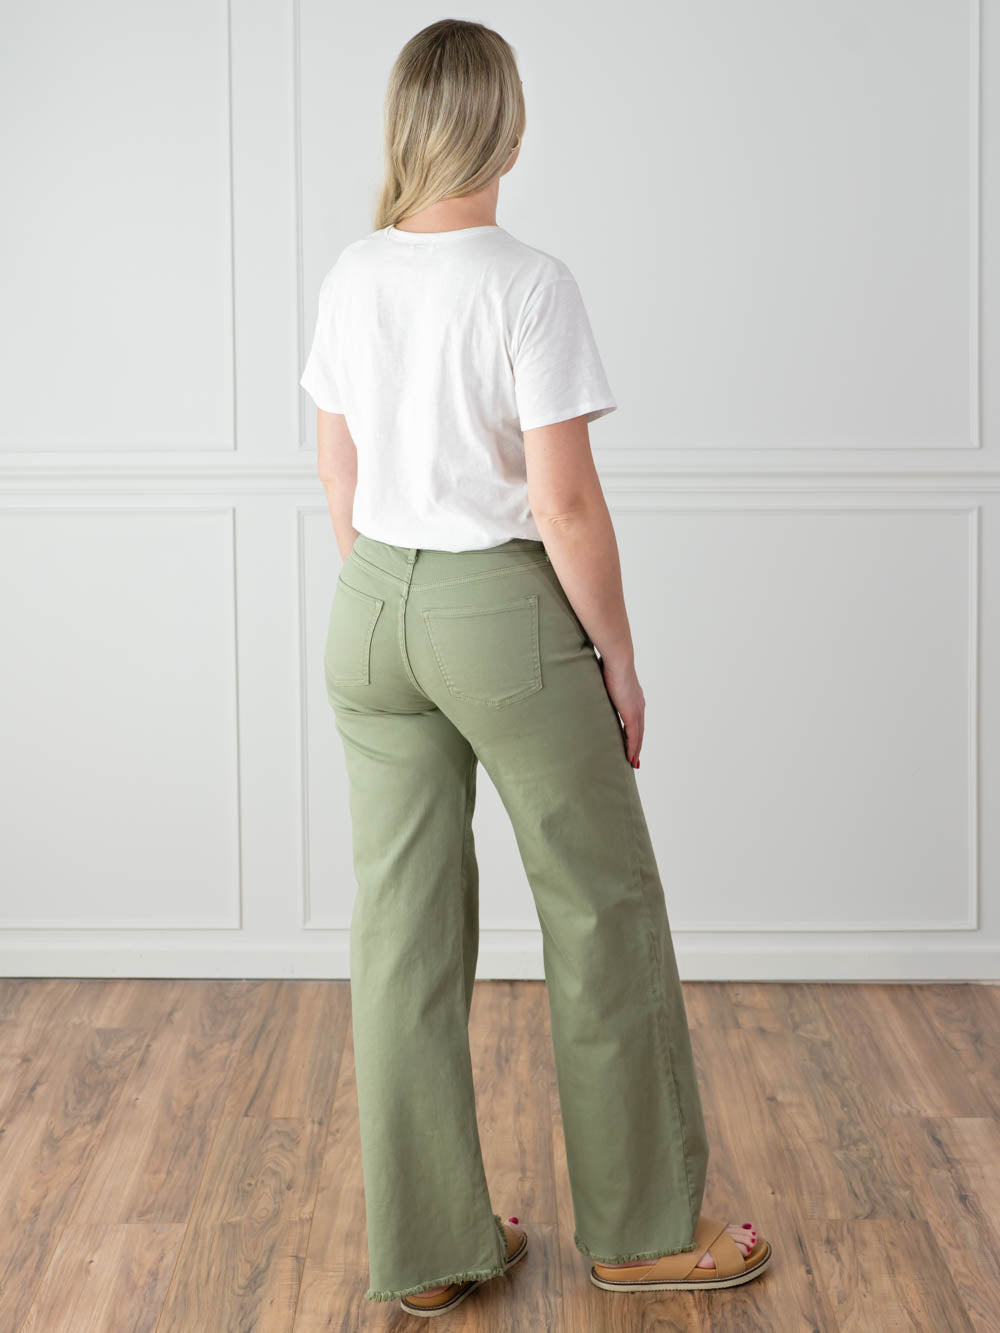 Best Wide Leg Jeans for Tall Ladies